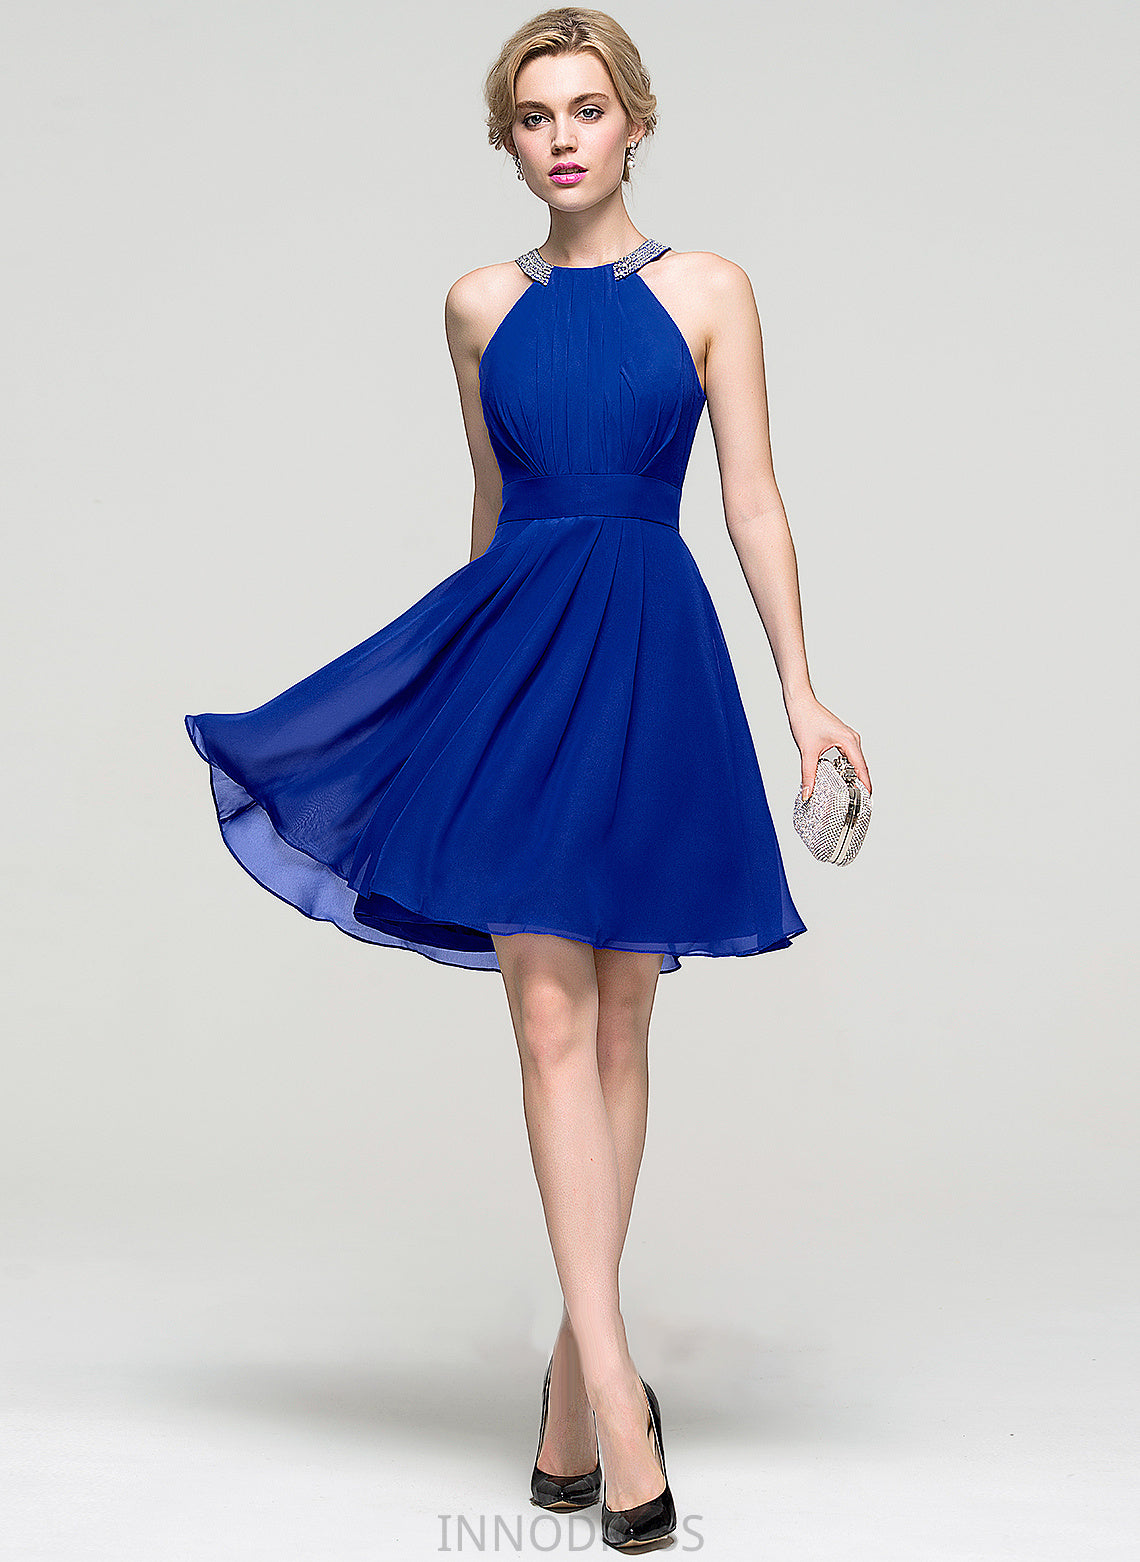 Chiffon Ruffle A-Line Knee-Length Prom Dresses Scoop Neck With Shiloh Beading